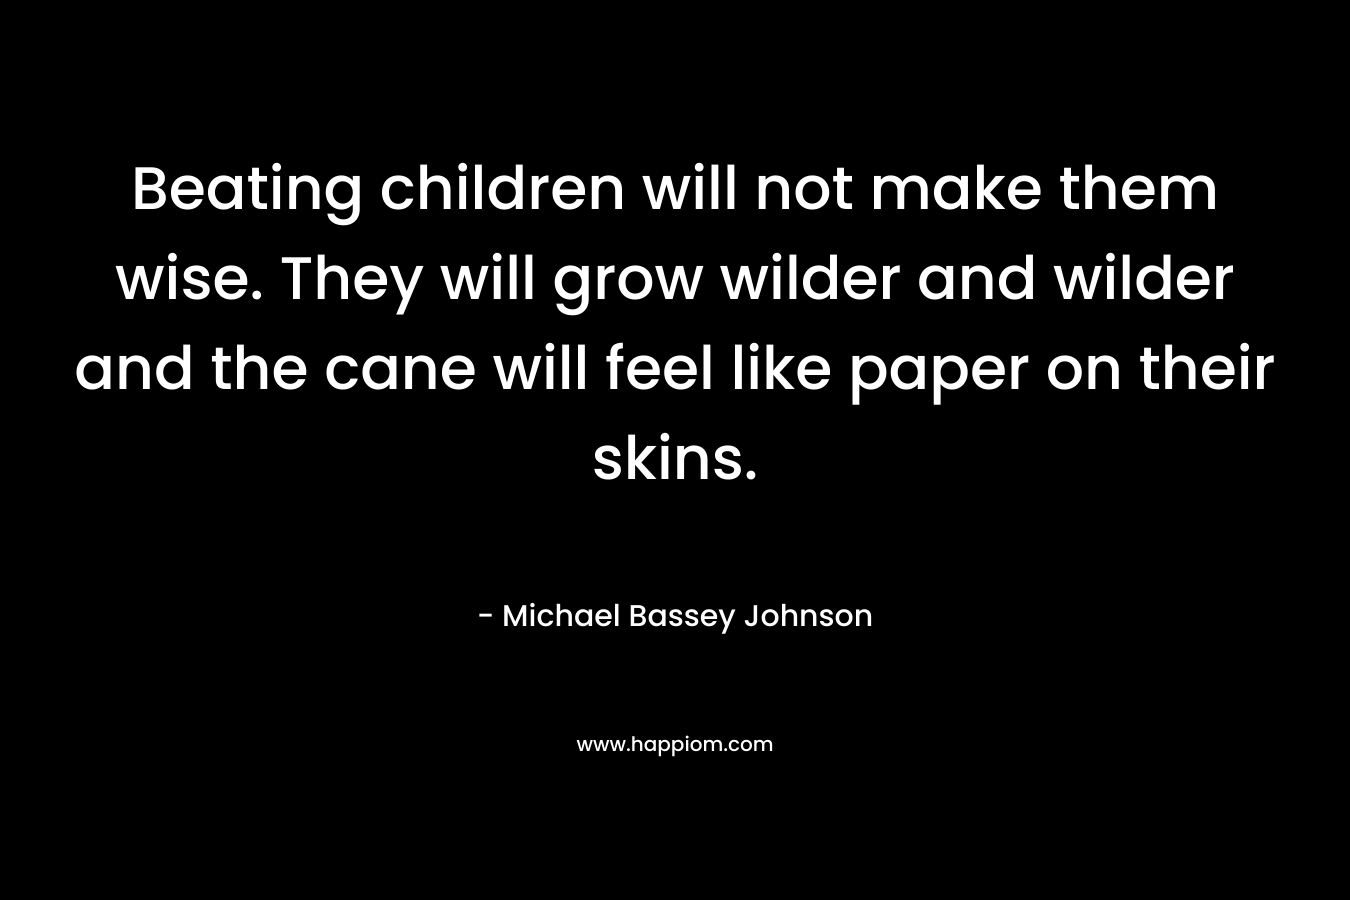 Beating children will not make them wise. They will grow wilder and wilder and the cane will feel like paper on their skins.